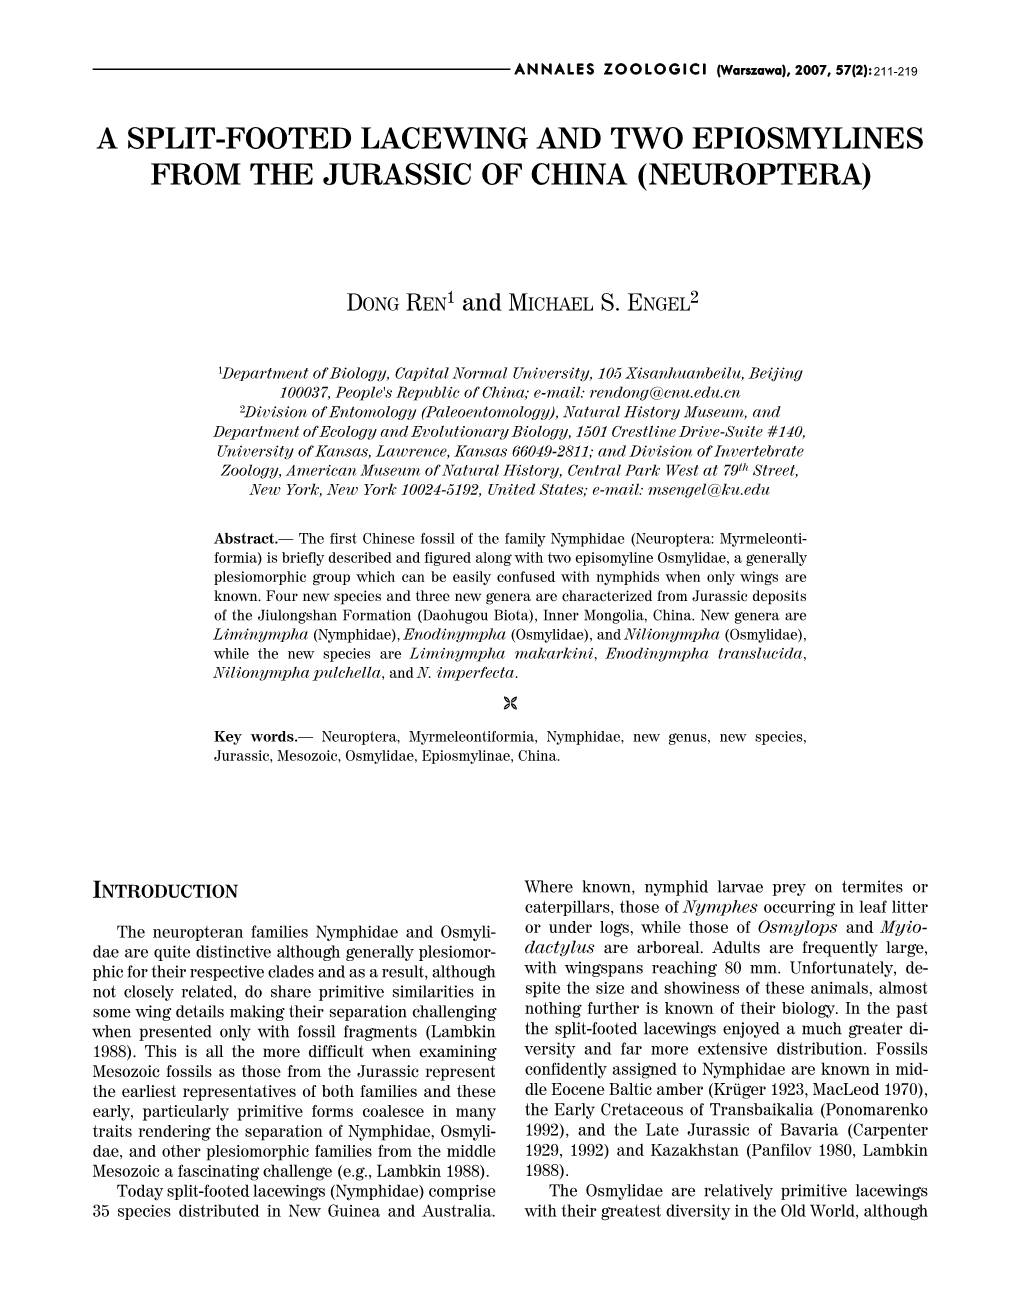 A Split-Footed Lacewing and Two Epiosmylines from the Jurassic of China (Neuroptera)